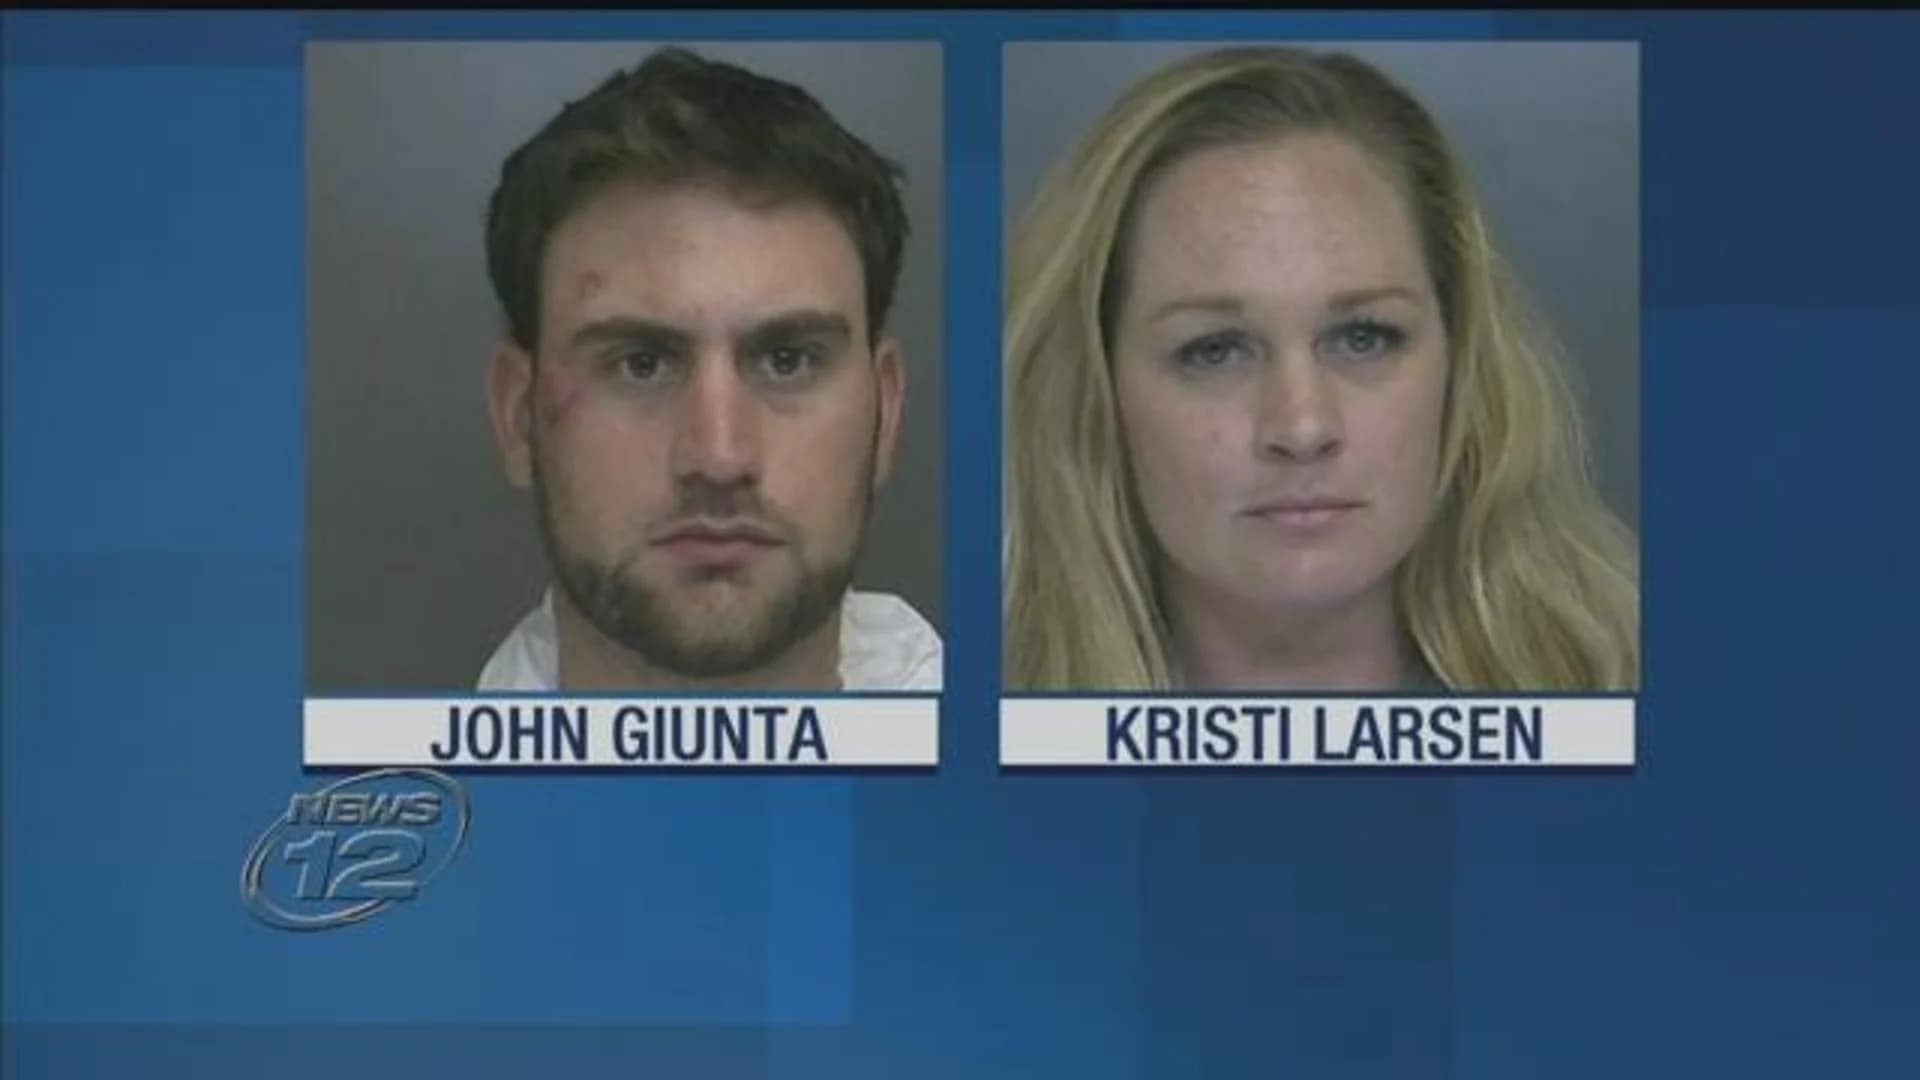 Police: 2 arrested after robbing 3 Smithtown pharmacies